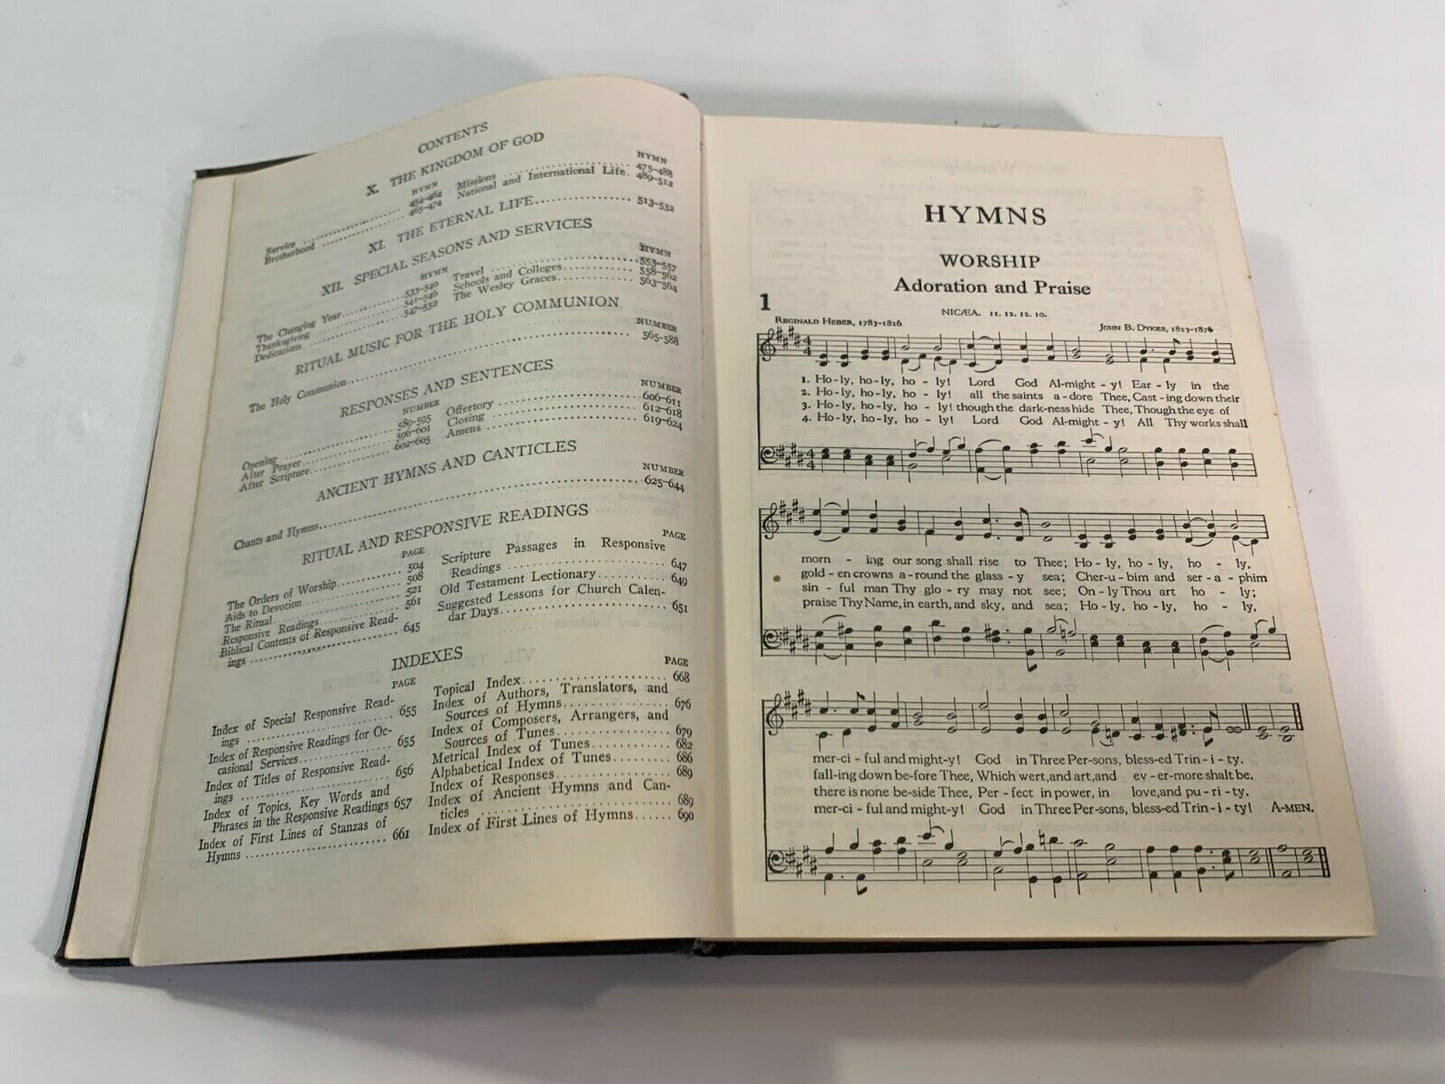 The Methodist Hymnal 1939 Official Hymnal of the Methodist Church Vintage